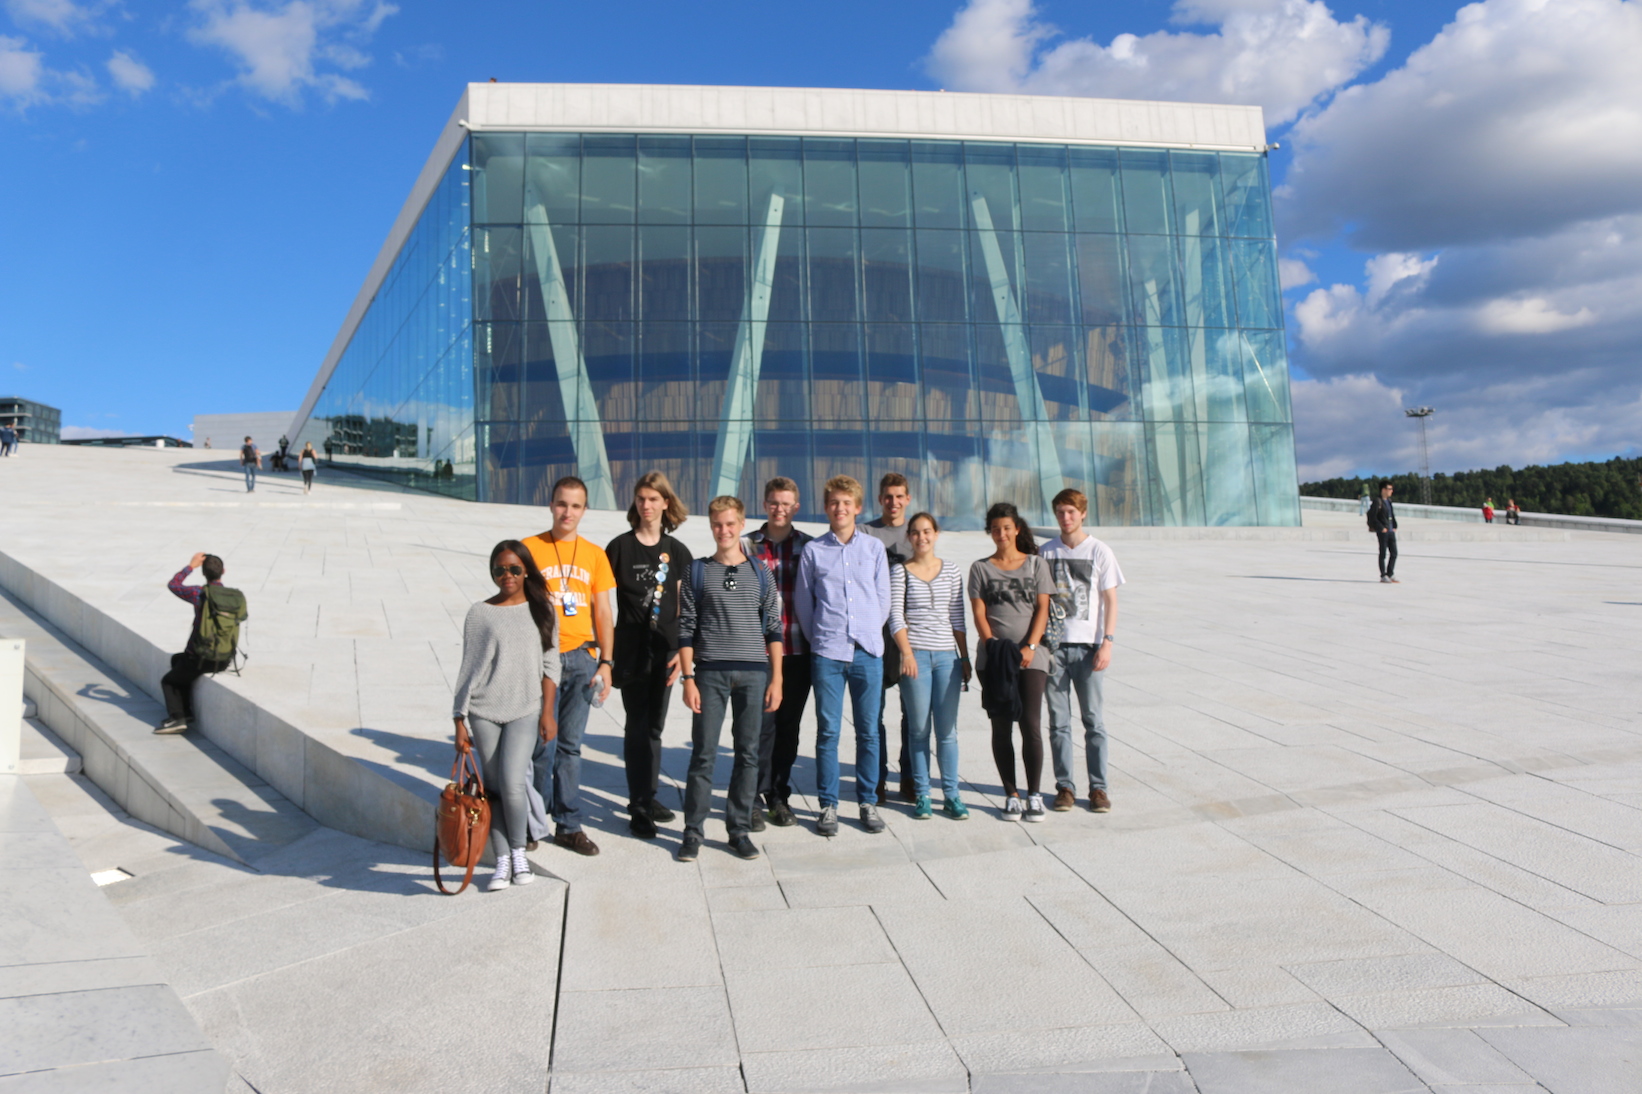 Participants in front of Oslo's famous Opera house